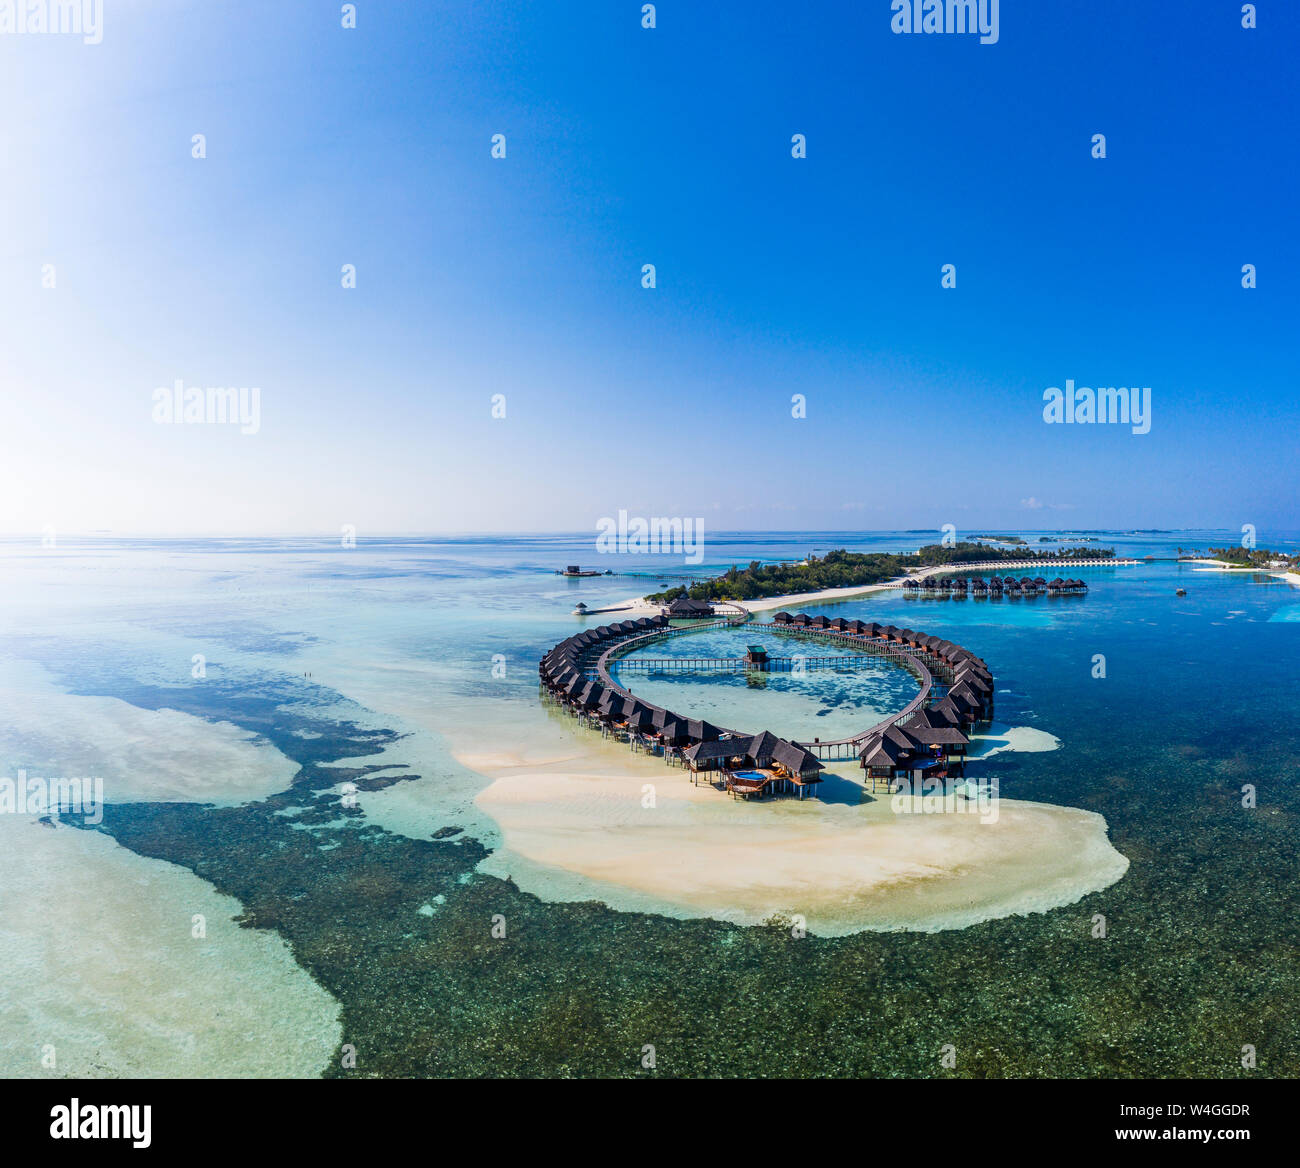 Aerial view over Olhuveli with water bungalows, South Male Atoll, Maldives Stock Photo